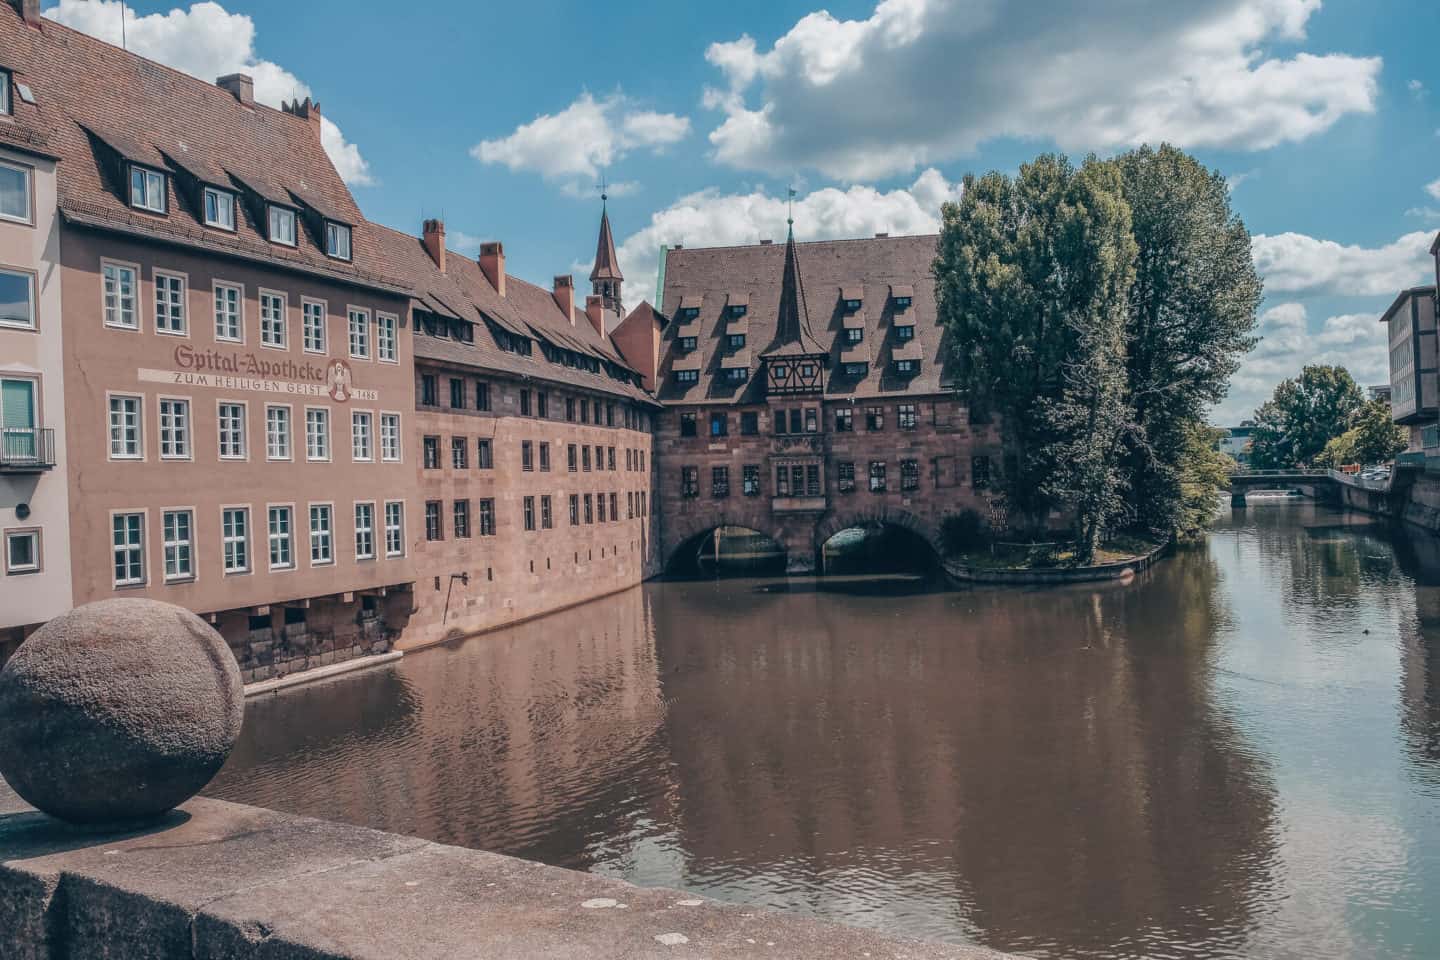 One of the best Day Trips From Nuremberg, looking out over the river and an old stone building.